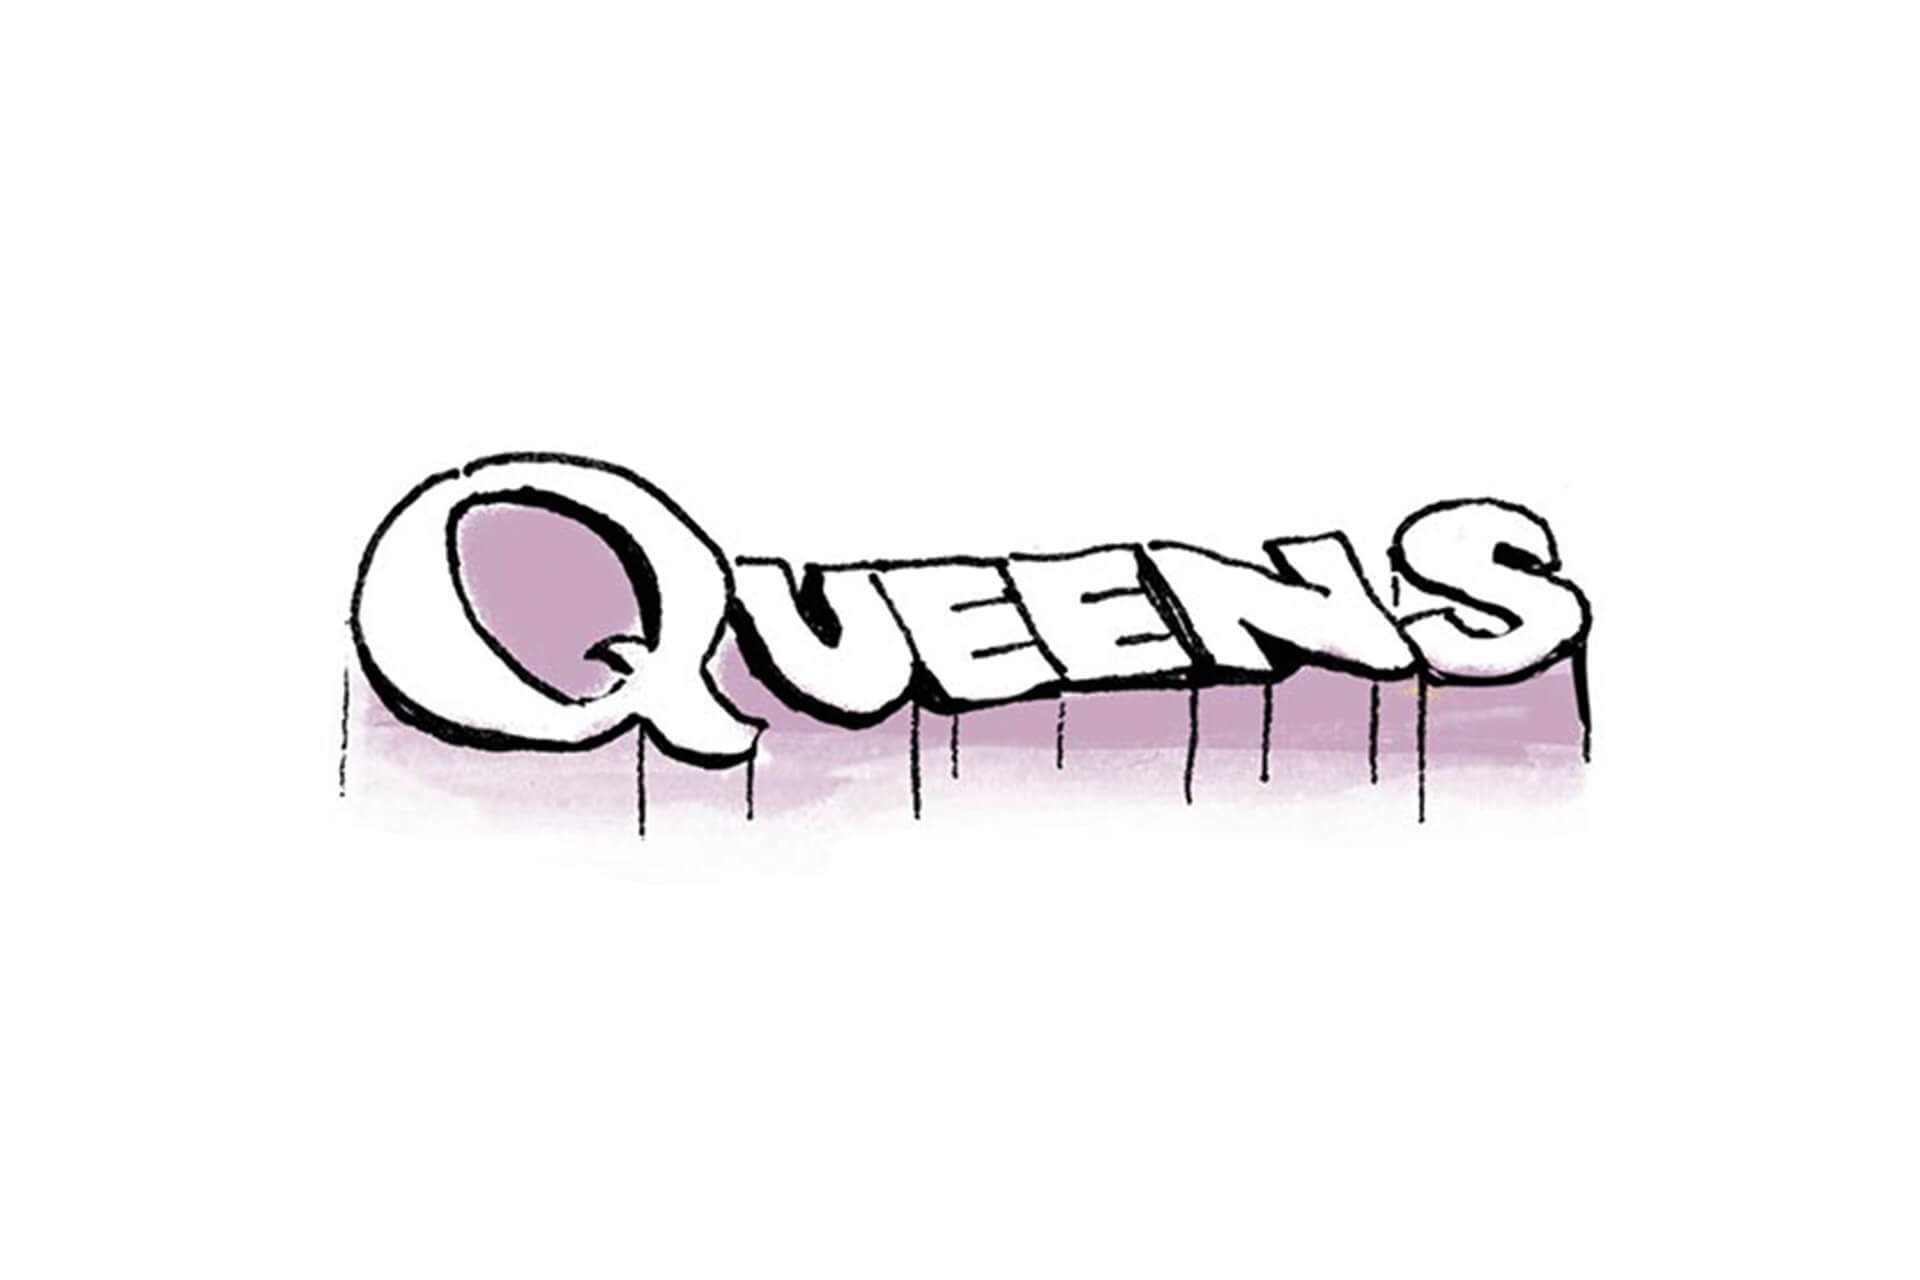 illustrated-cities-lettering-queens.jpg